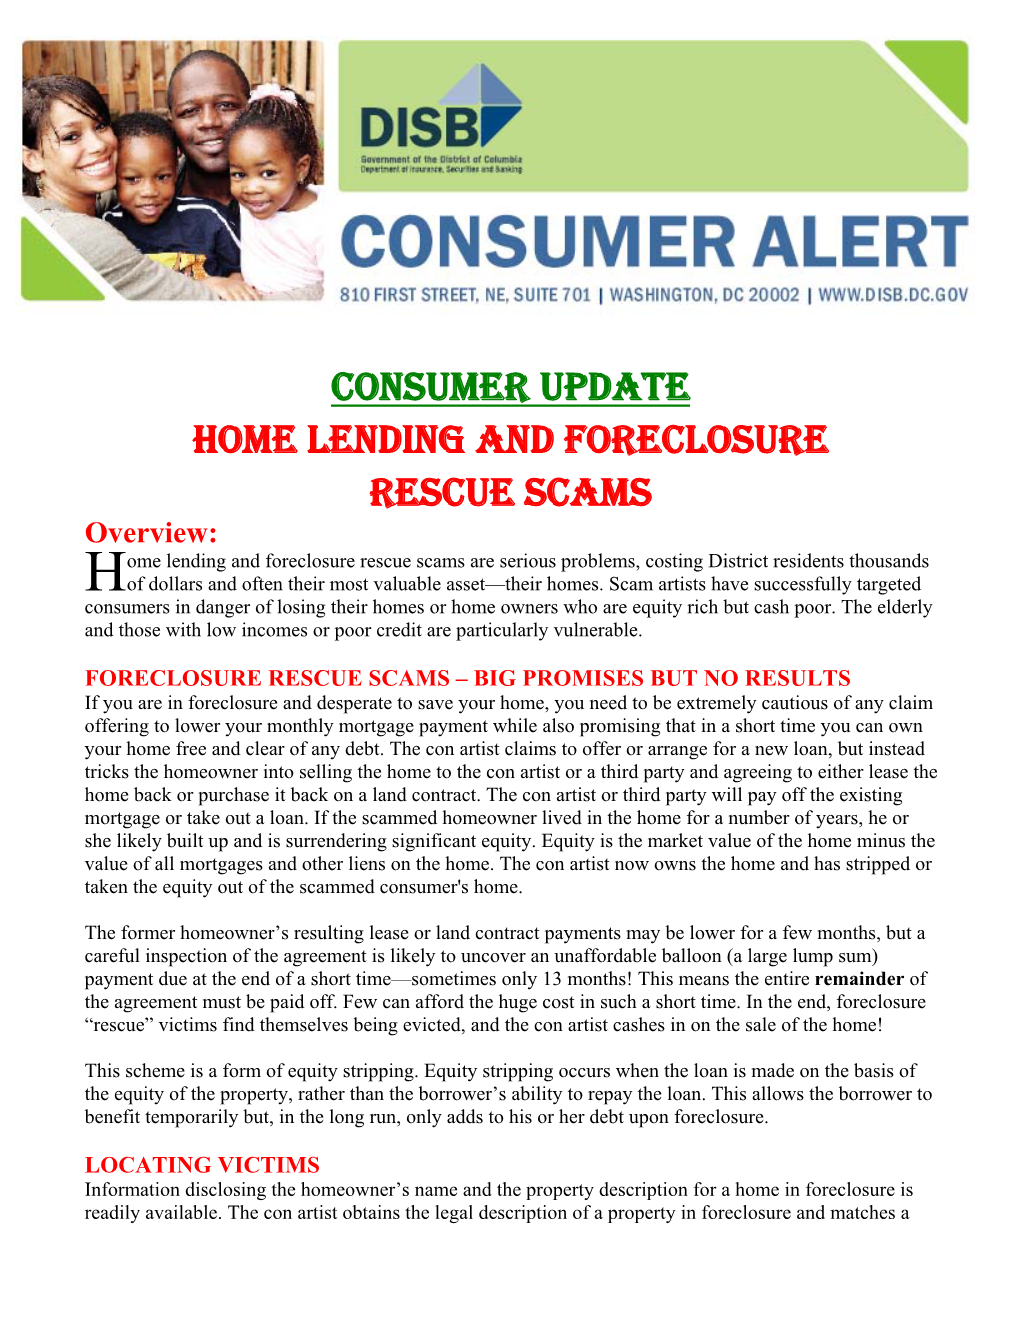 Consumer Update Home Lending and Foreclosure Rescue Scams